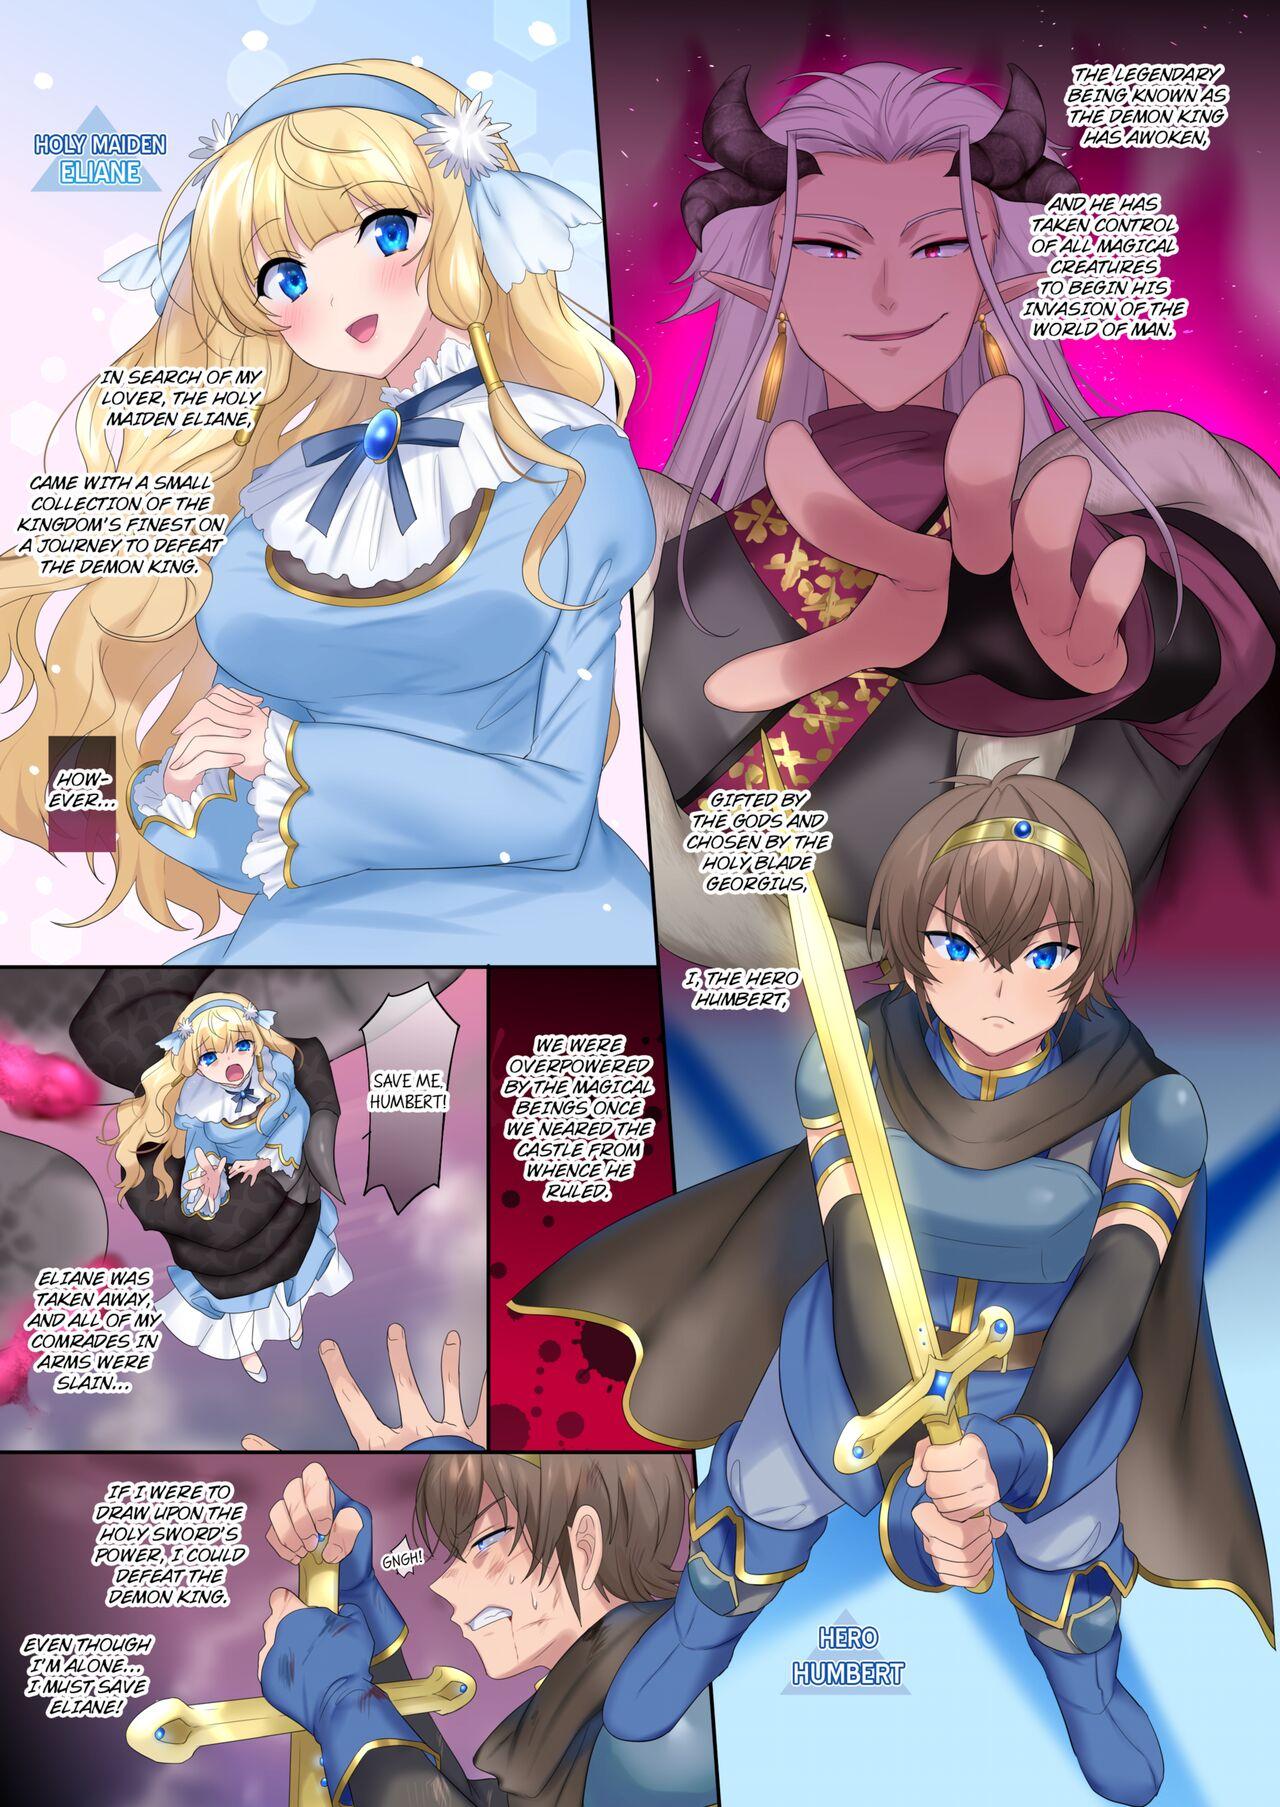 Casting A Hero's Fall from Grace Dragon Princess Gaystraight - Page 3